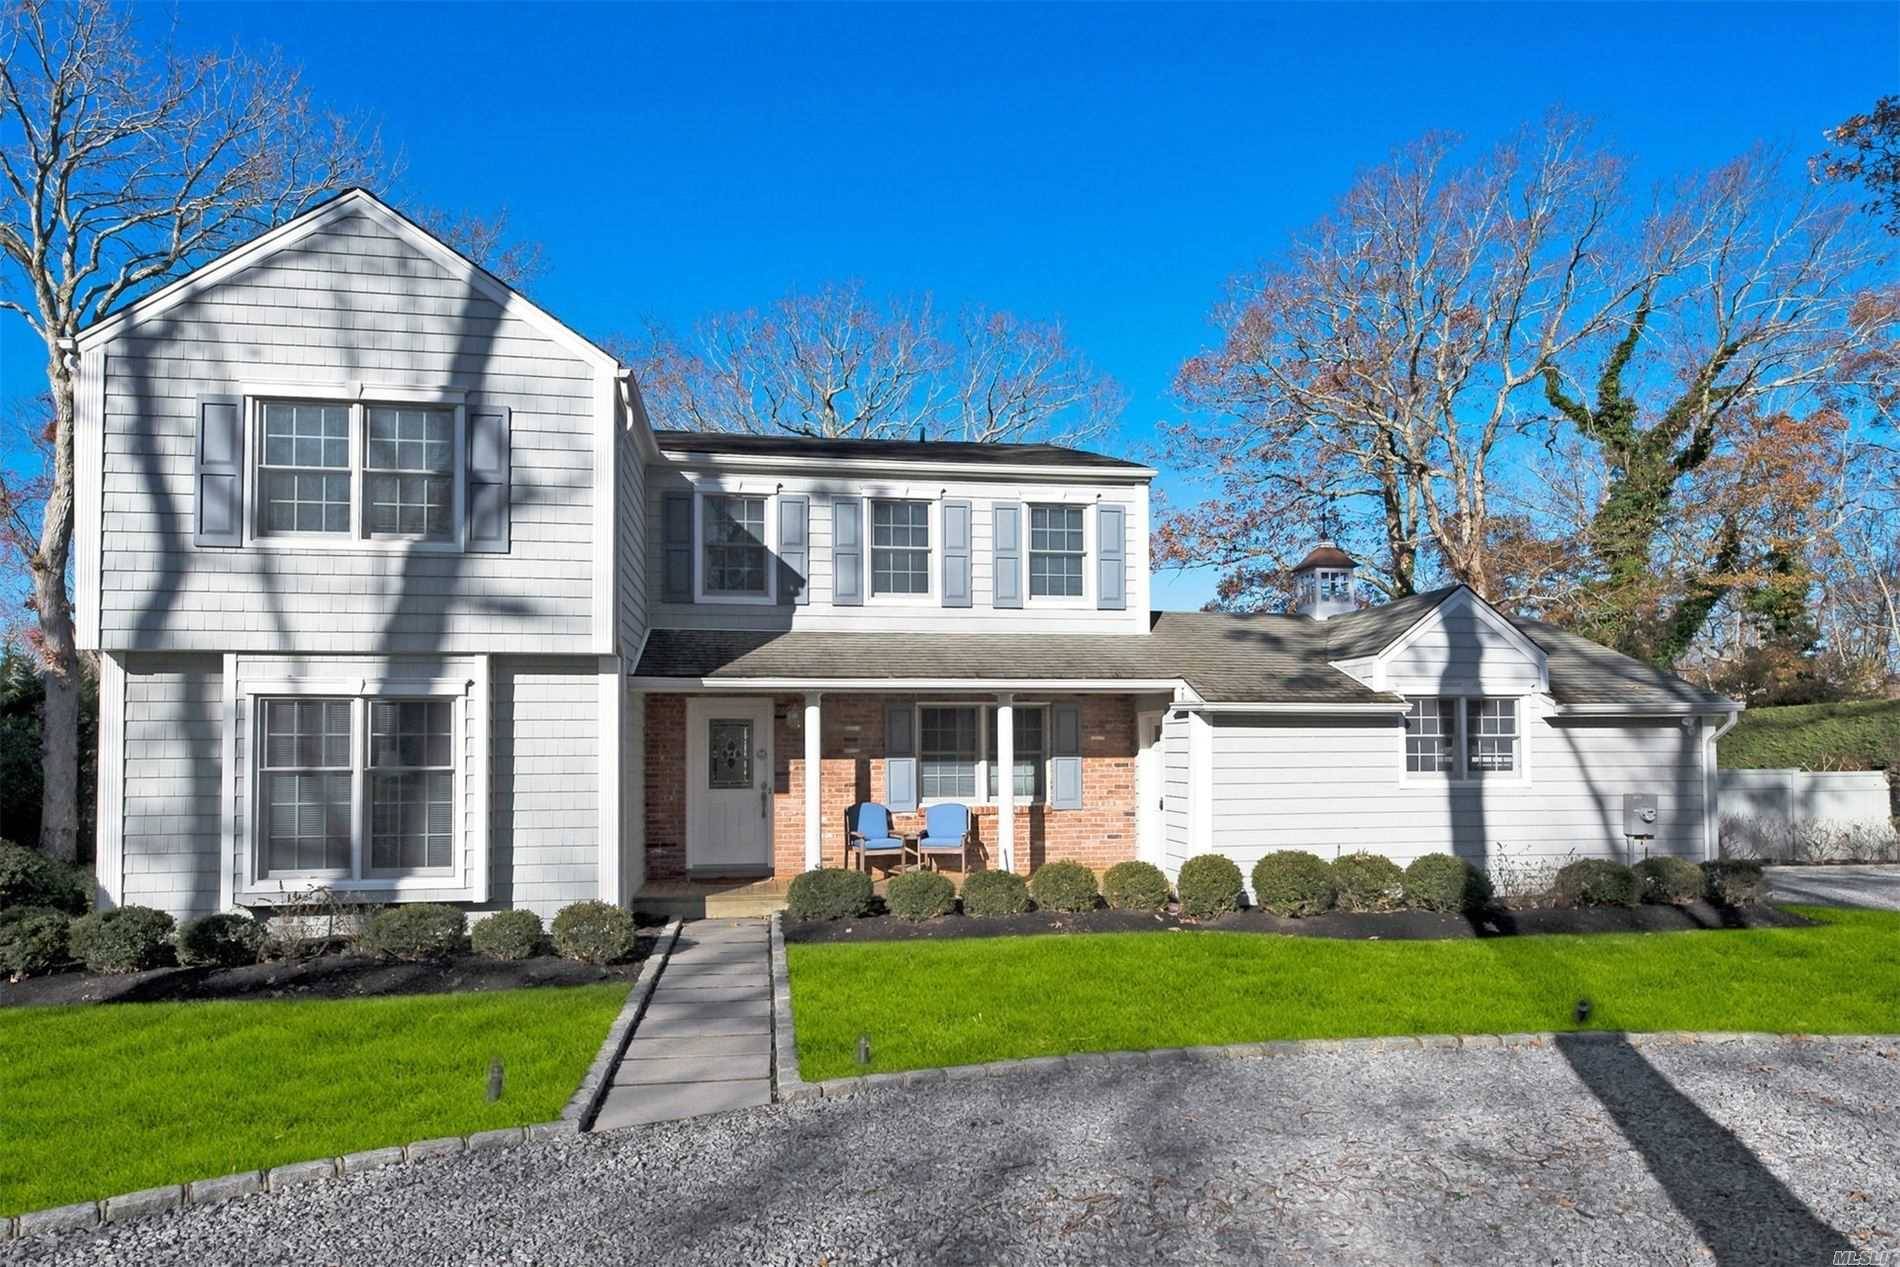 Impeccable five bedroom colonial in Old Harbor Colony.